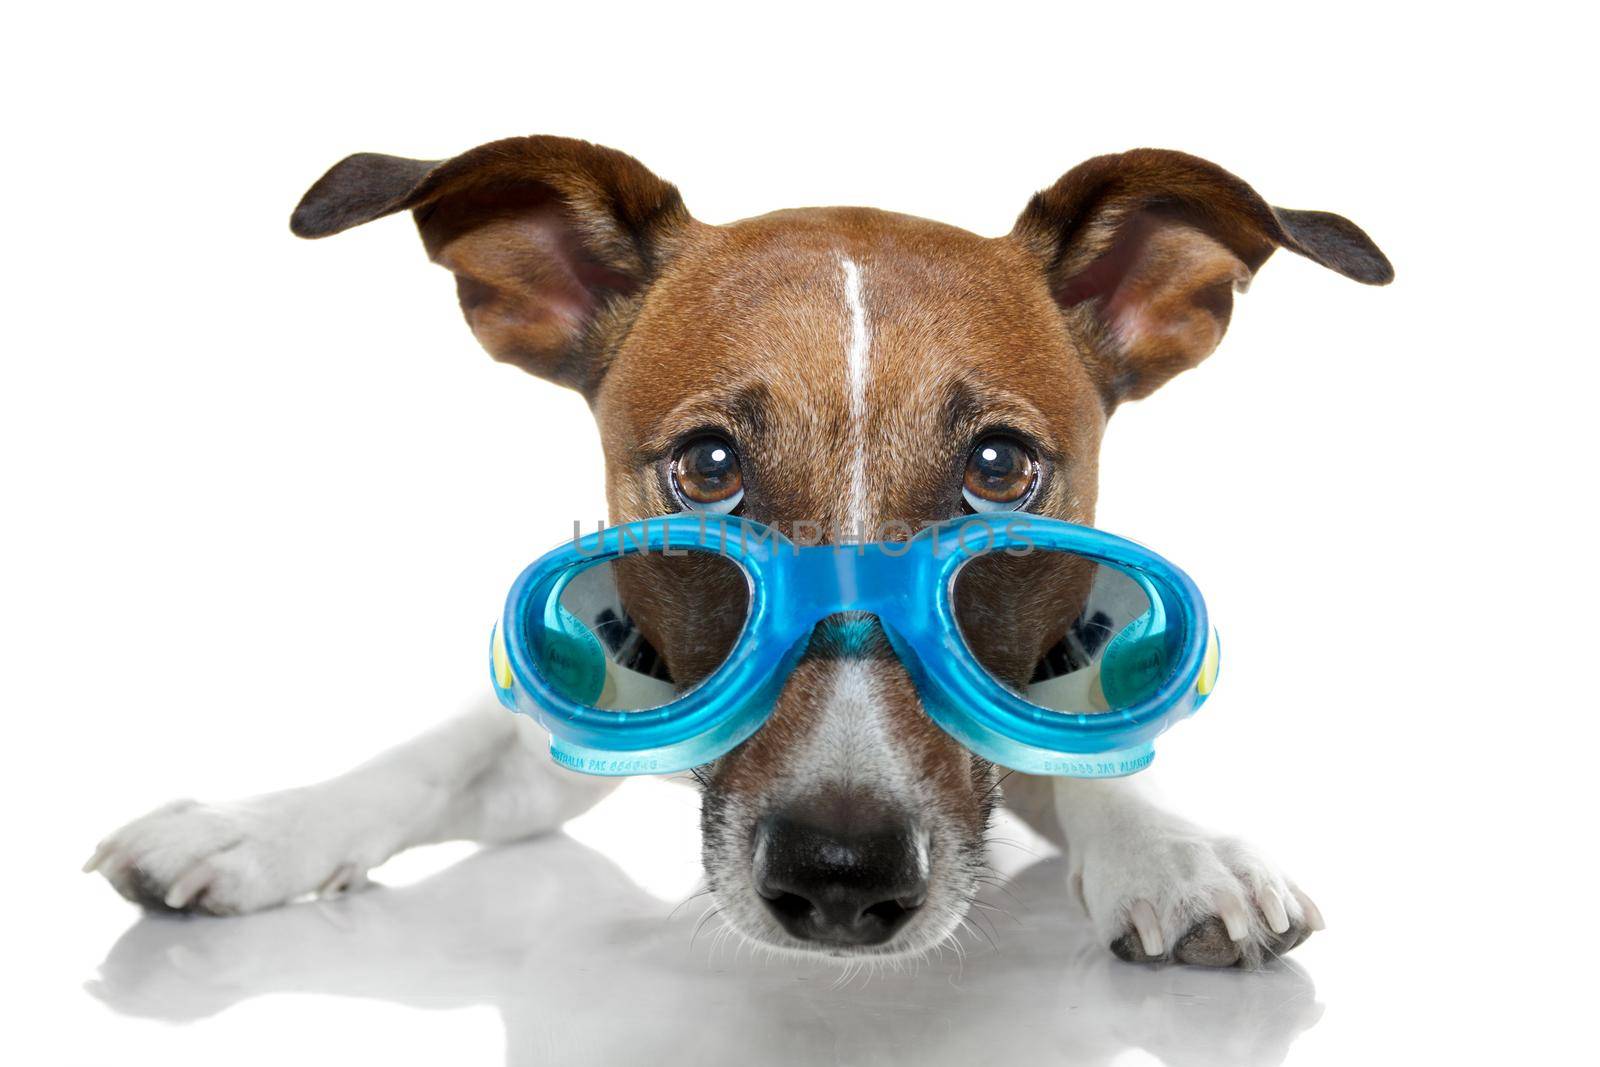 Dog with blue goggles by Brosch